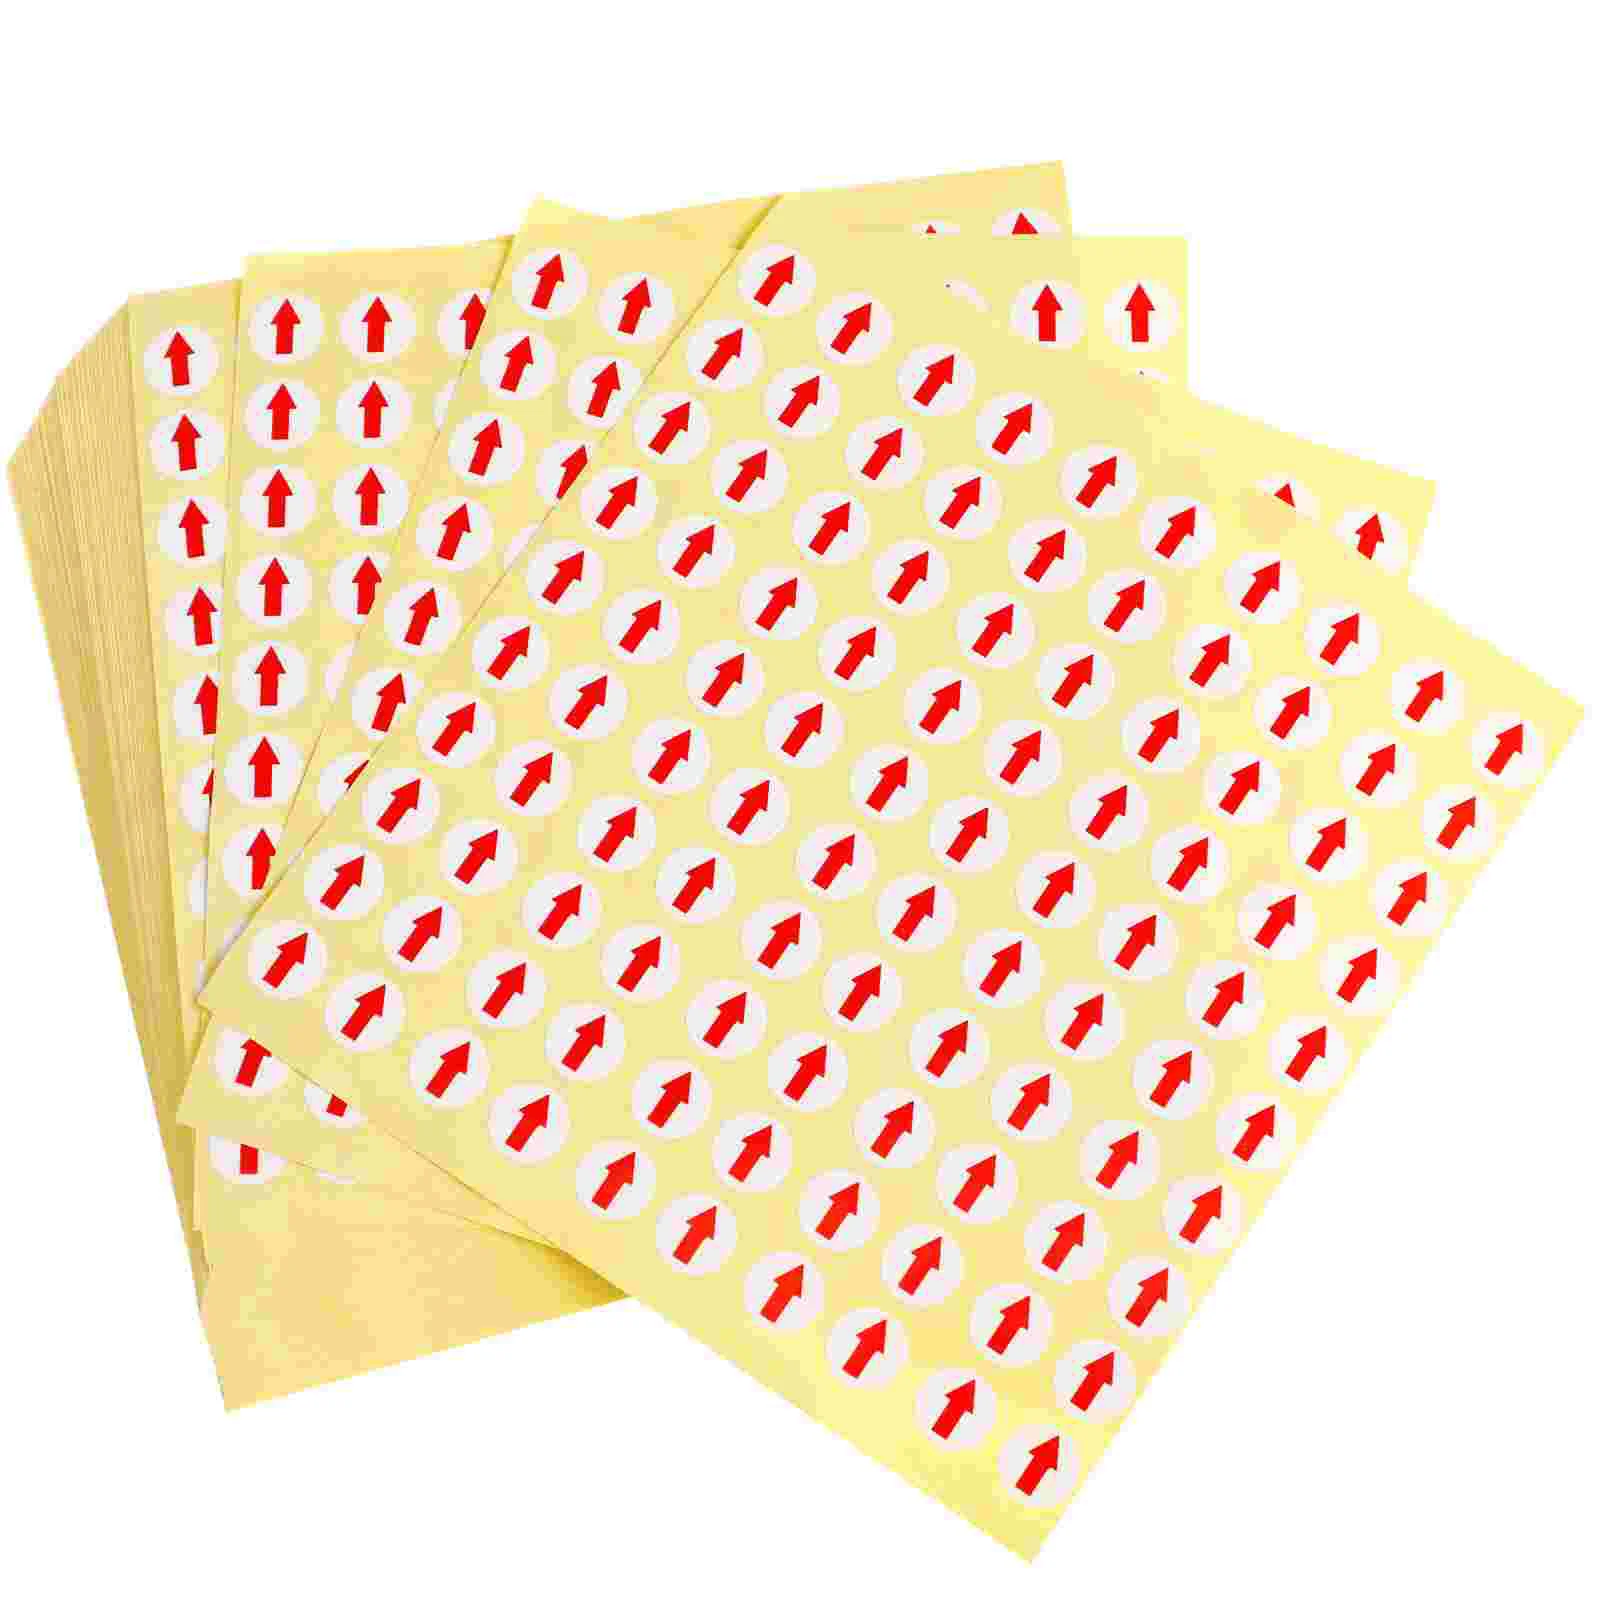 

6400PCS 10mm Self Adhesive Sticky Red Arrow Labels Removable Small Circle Dot Stickers Product Inspection Defect Indicator Tapes